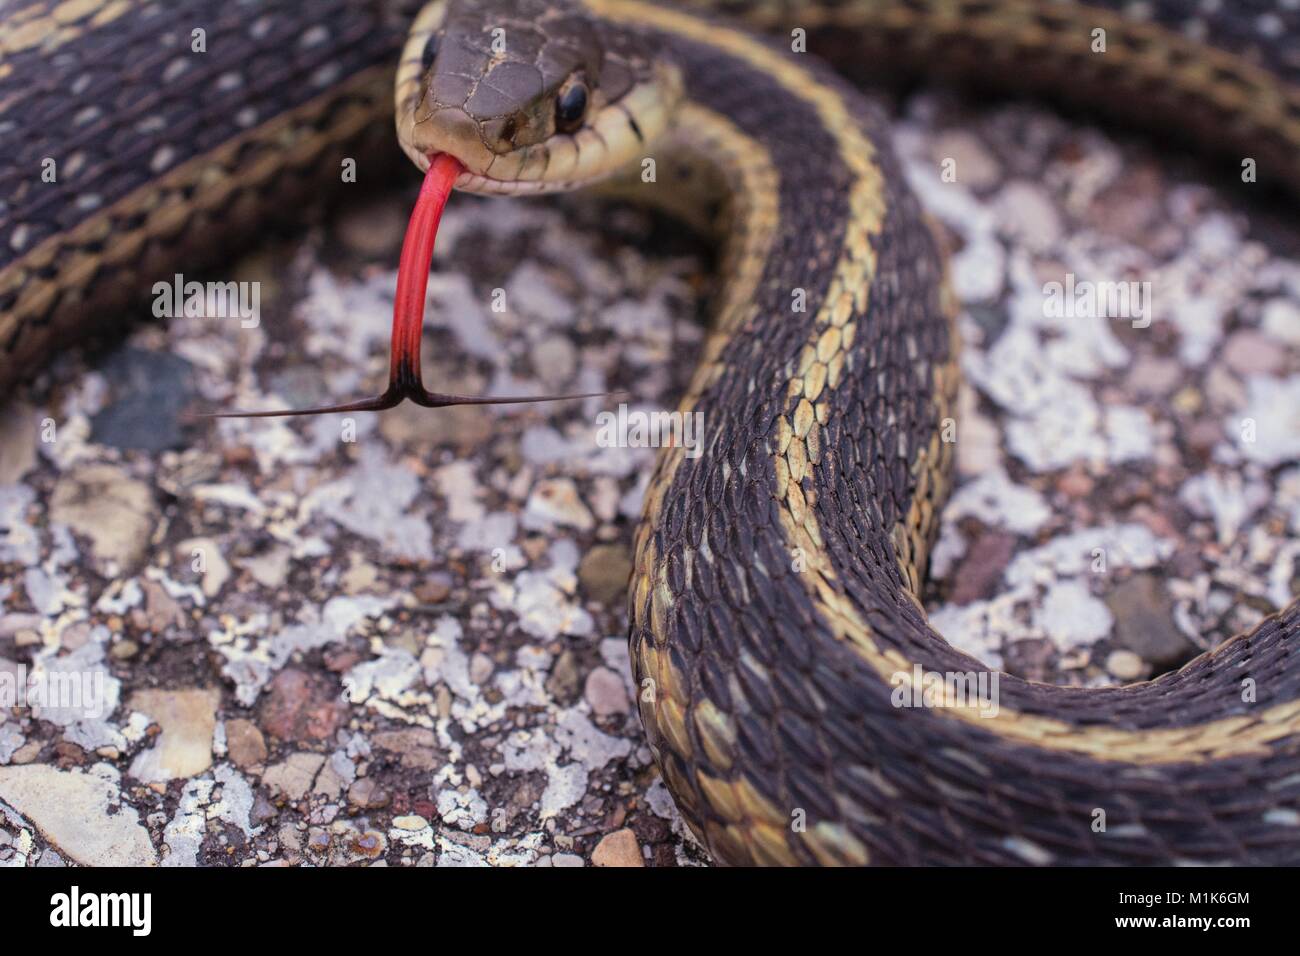 Garter snake with it's split tongue sticking out. Class Reptilia, Order Squamata, Suborder Serpentes, Family Colubridae, Species T. Sirtalis Stock Photo